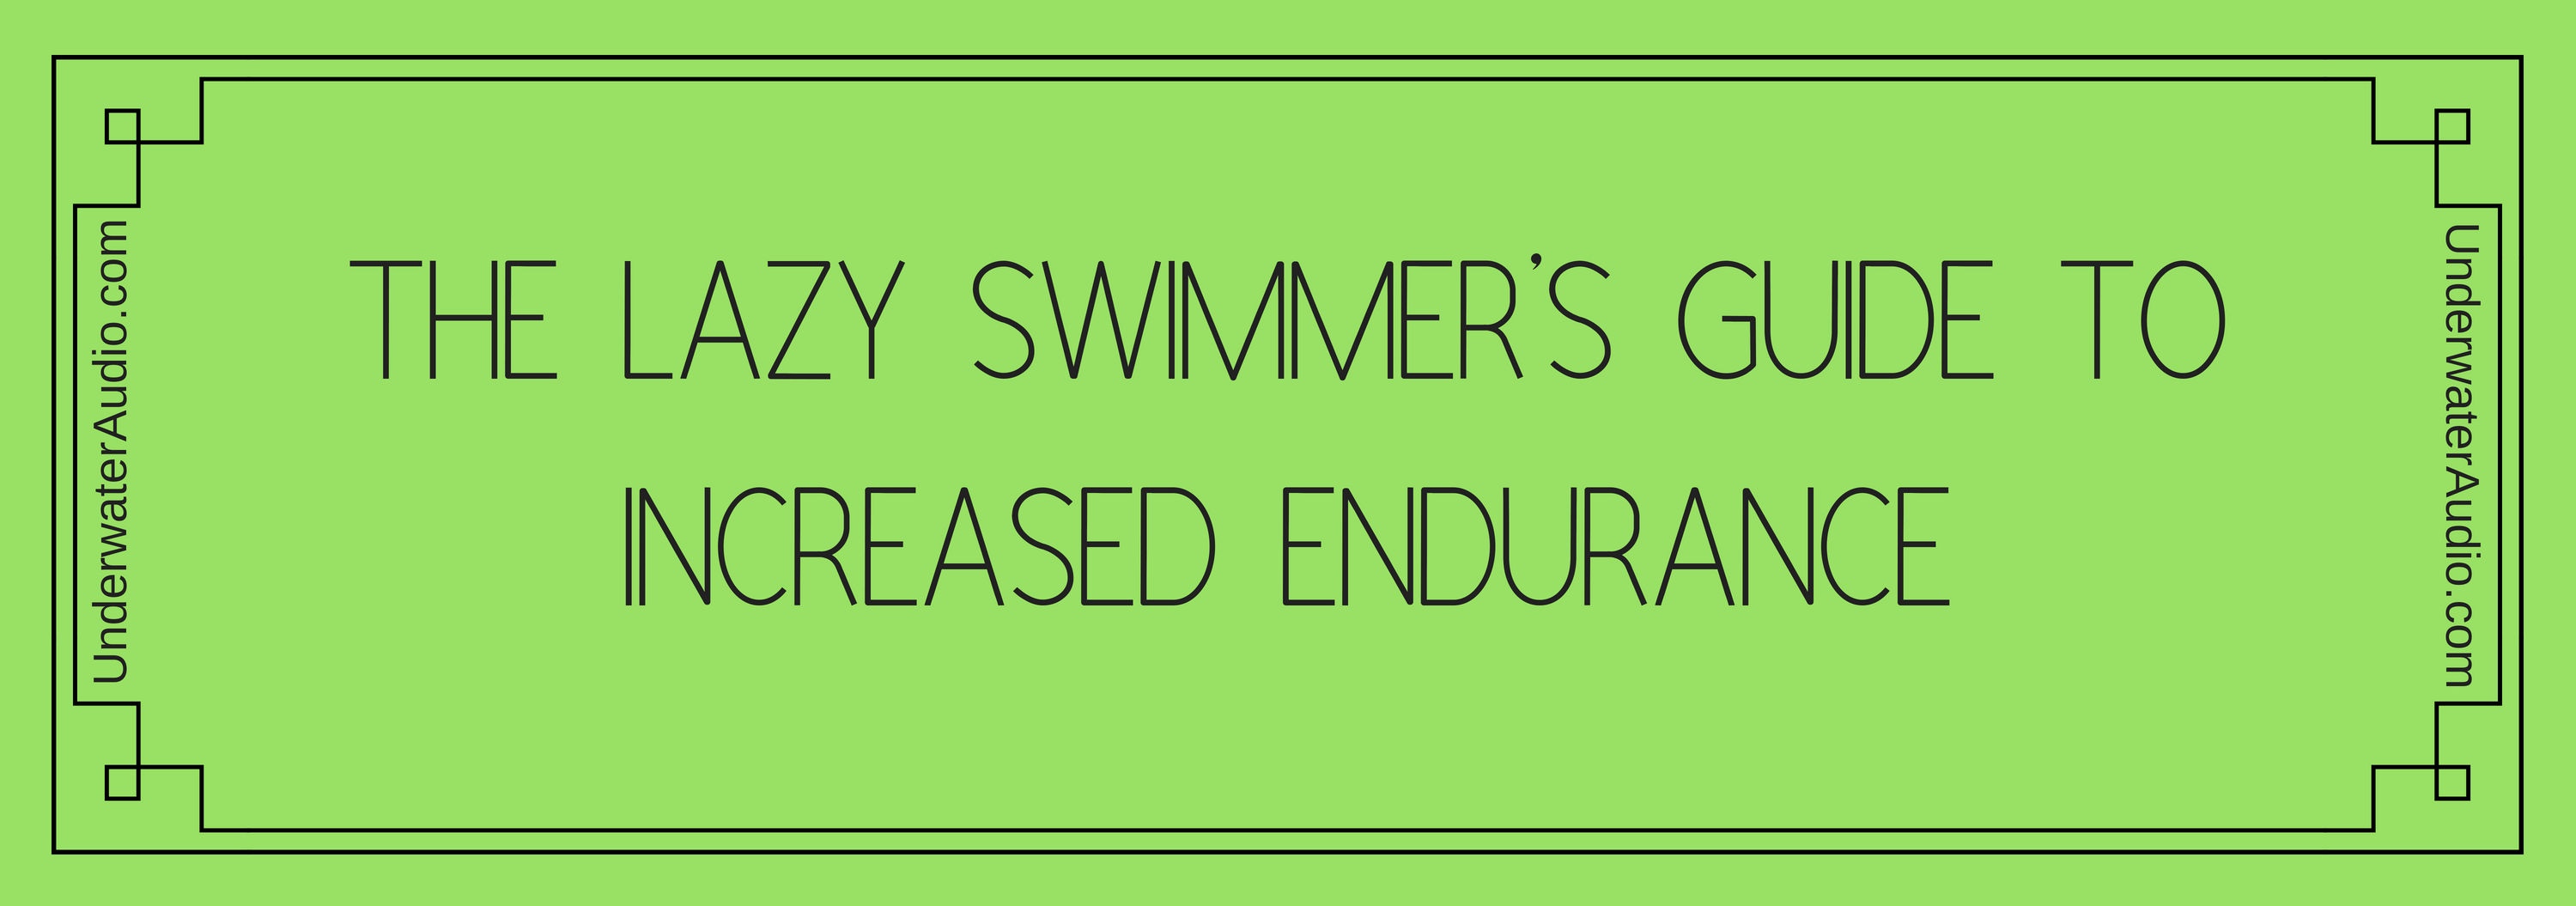 The Lazy Swimmer’s Guide to Increased Endurance